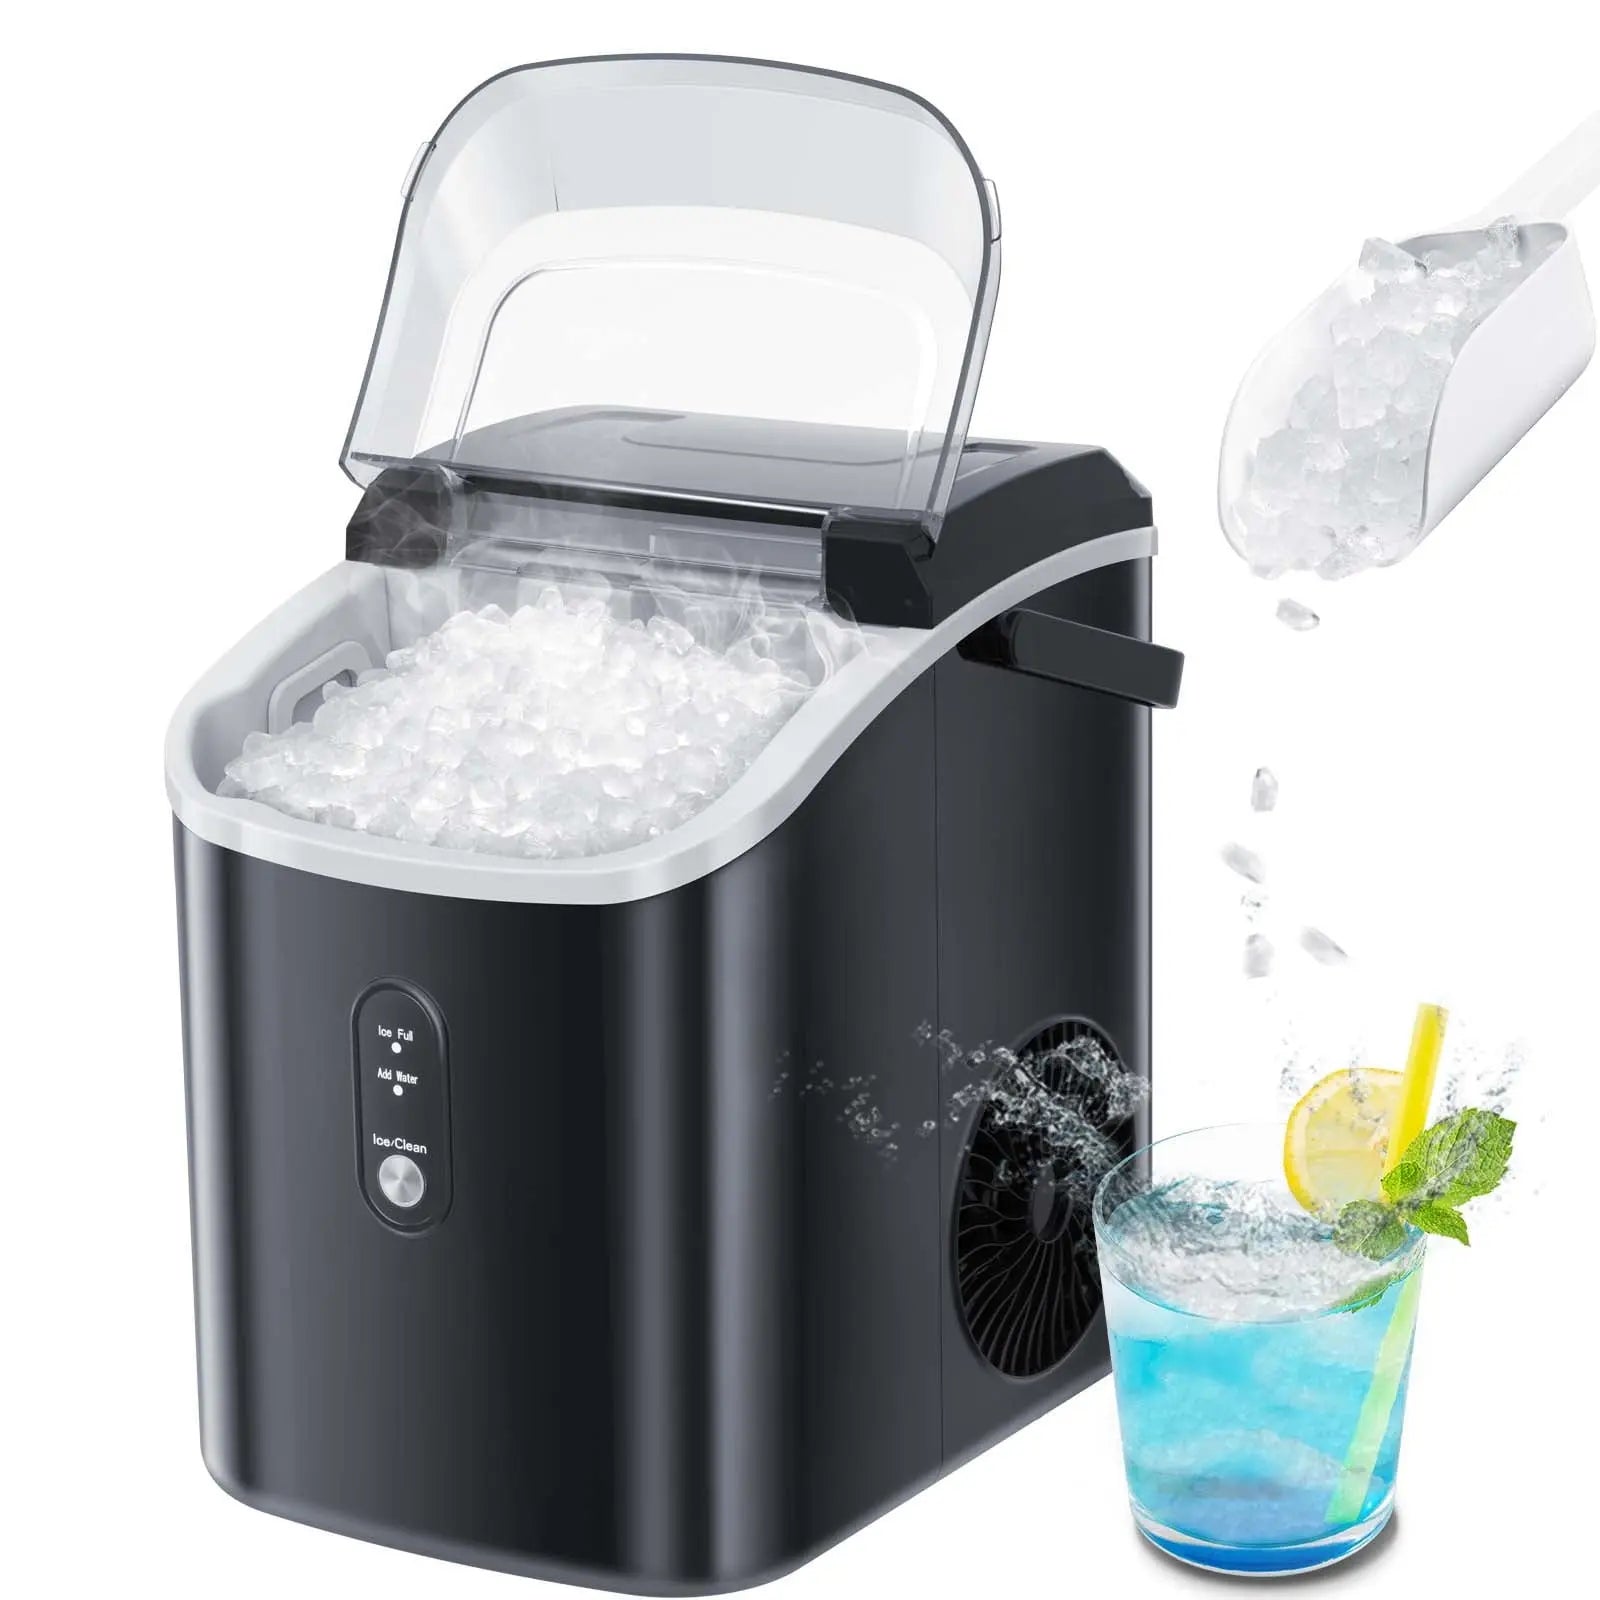 NUGGET ICE MACHINE CLEANING KIT